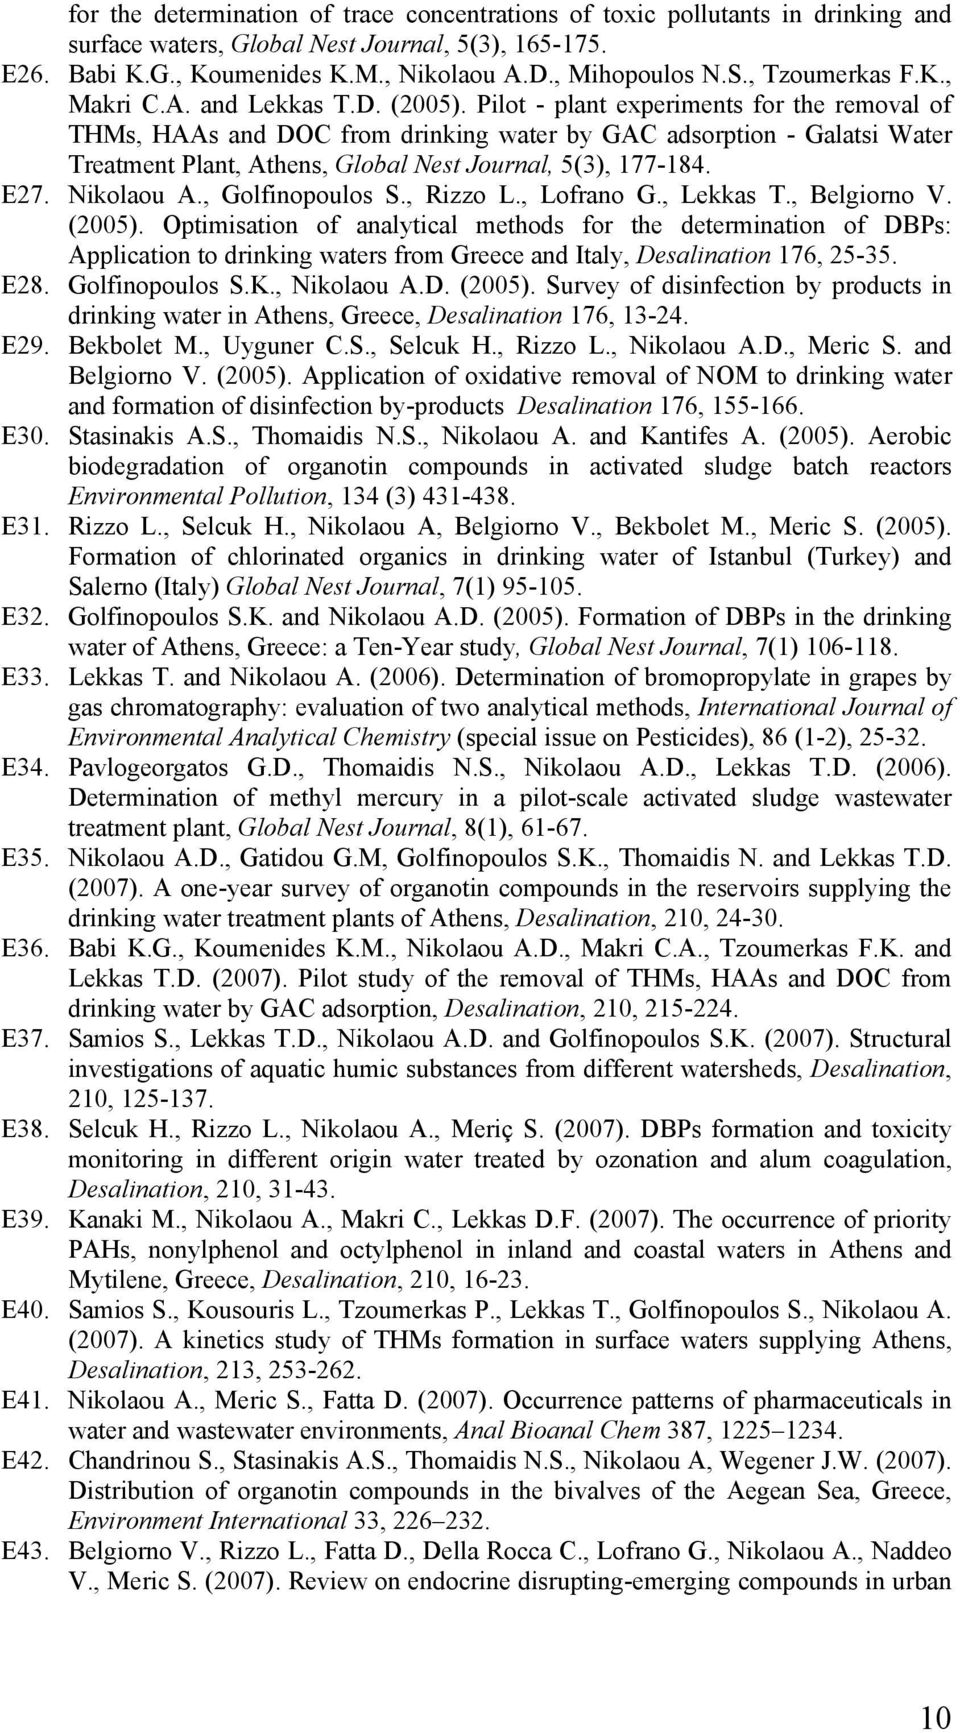 Pilot - plant experiments for the removal of THMs, HAAs and DOC from drinking water by GAC adsorption - Galatsi Water Treatment Plant, Athens, Global Nest Journal, 5(3), 177-184. E27. Nikolaou A.